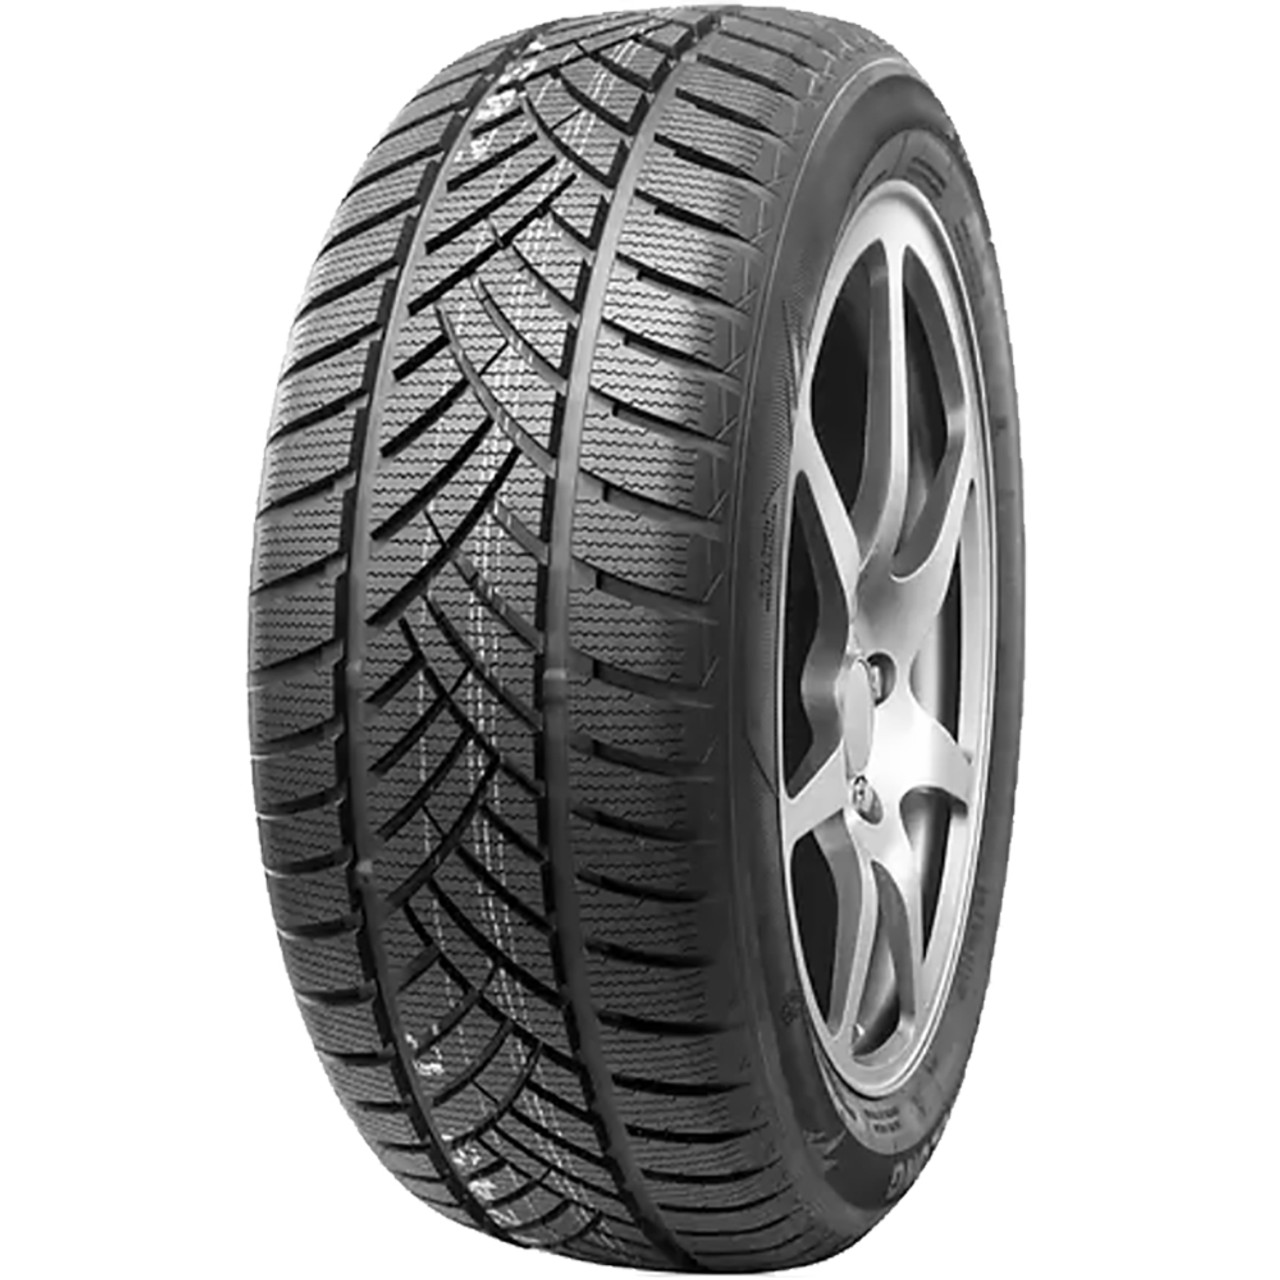 Gomme Nuove Leao 205/70 R15 96T WINT.DEFENDER HP M+S pneumatici nuovi Invernale